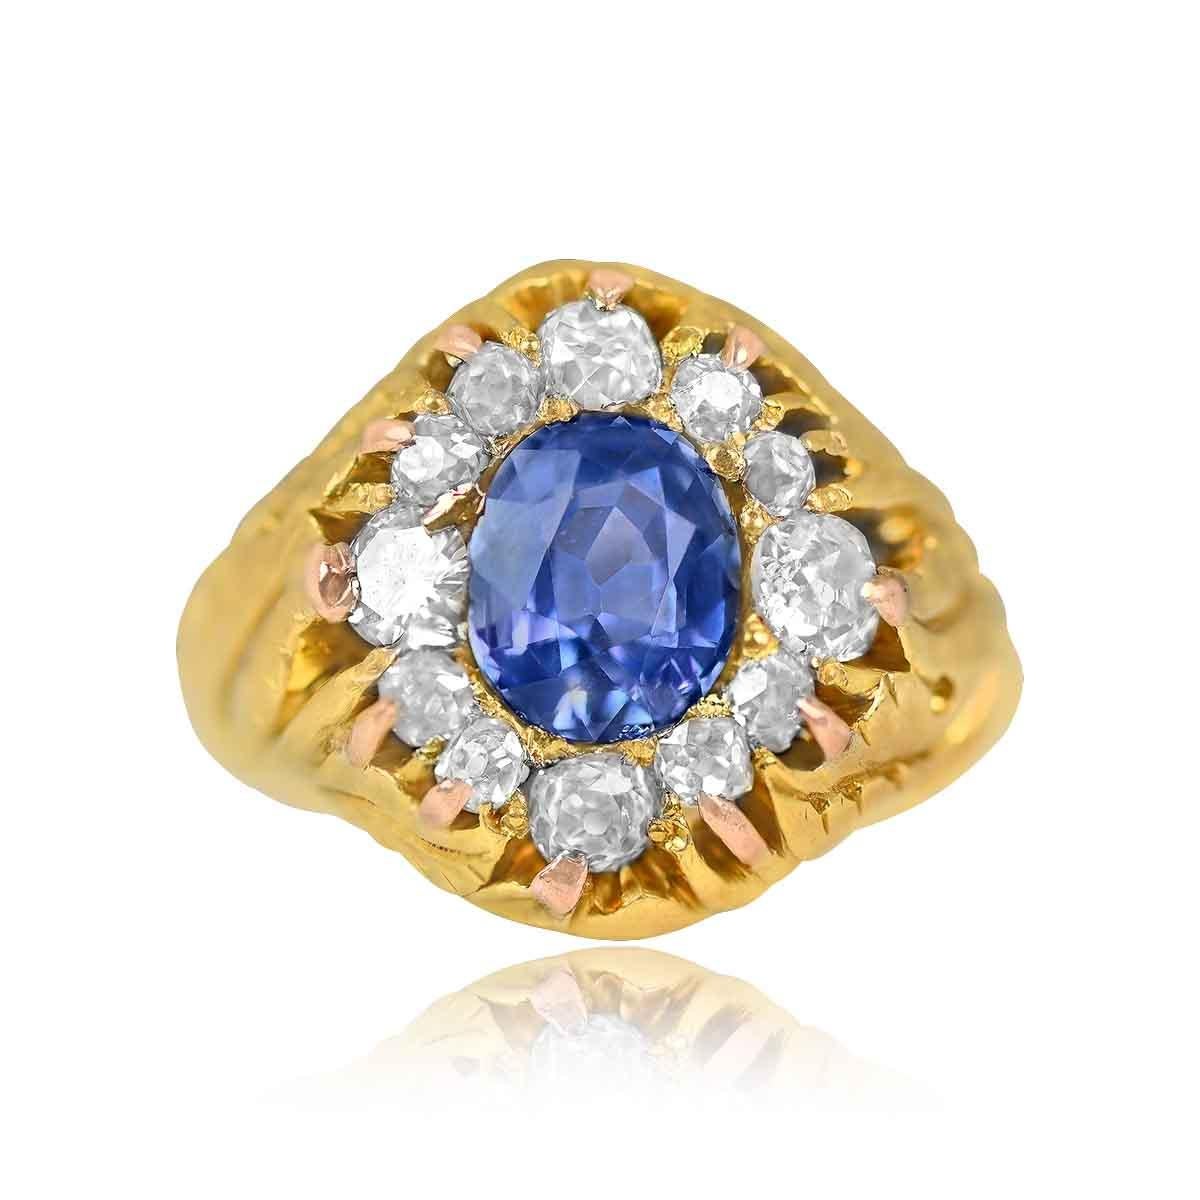 Exquisite Victorian-era Russian ring with a 3.00ct natural cornflower blue sapphire surrounded by 13 old mine-cut diamonds.

Ring Size: 6.5 US, Resizable 
Metal: Gold, Yellow Gold
Stone: Diamond, Sapphire
Stone Cut: Cushion Cut
Style: